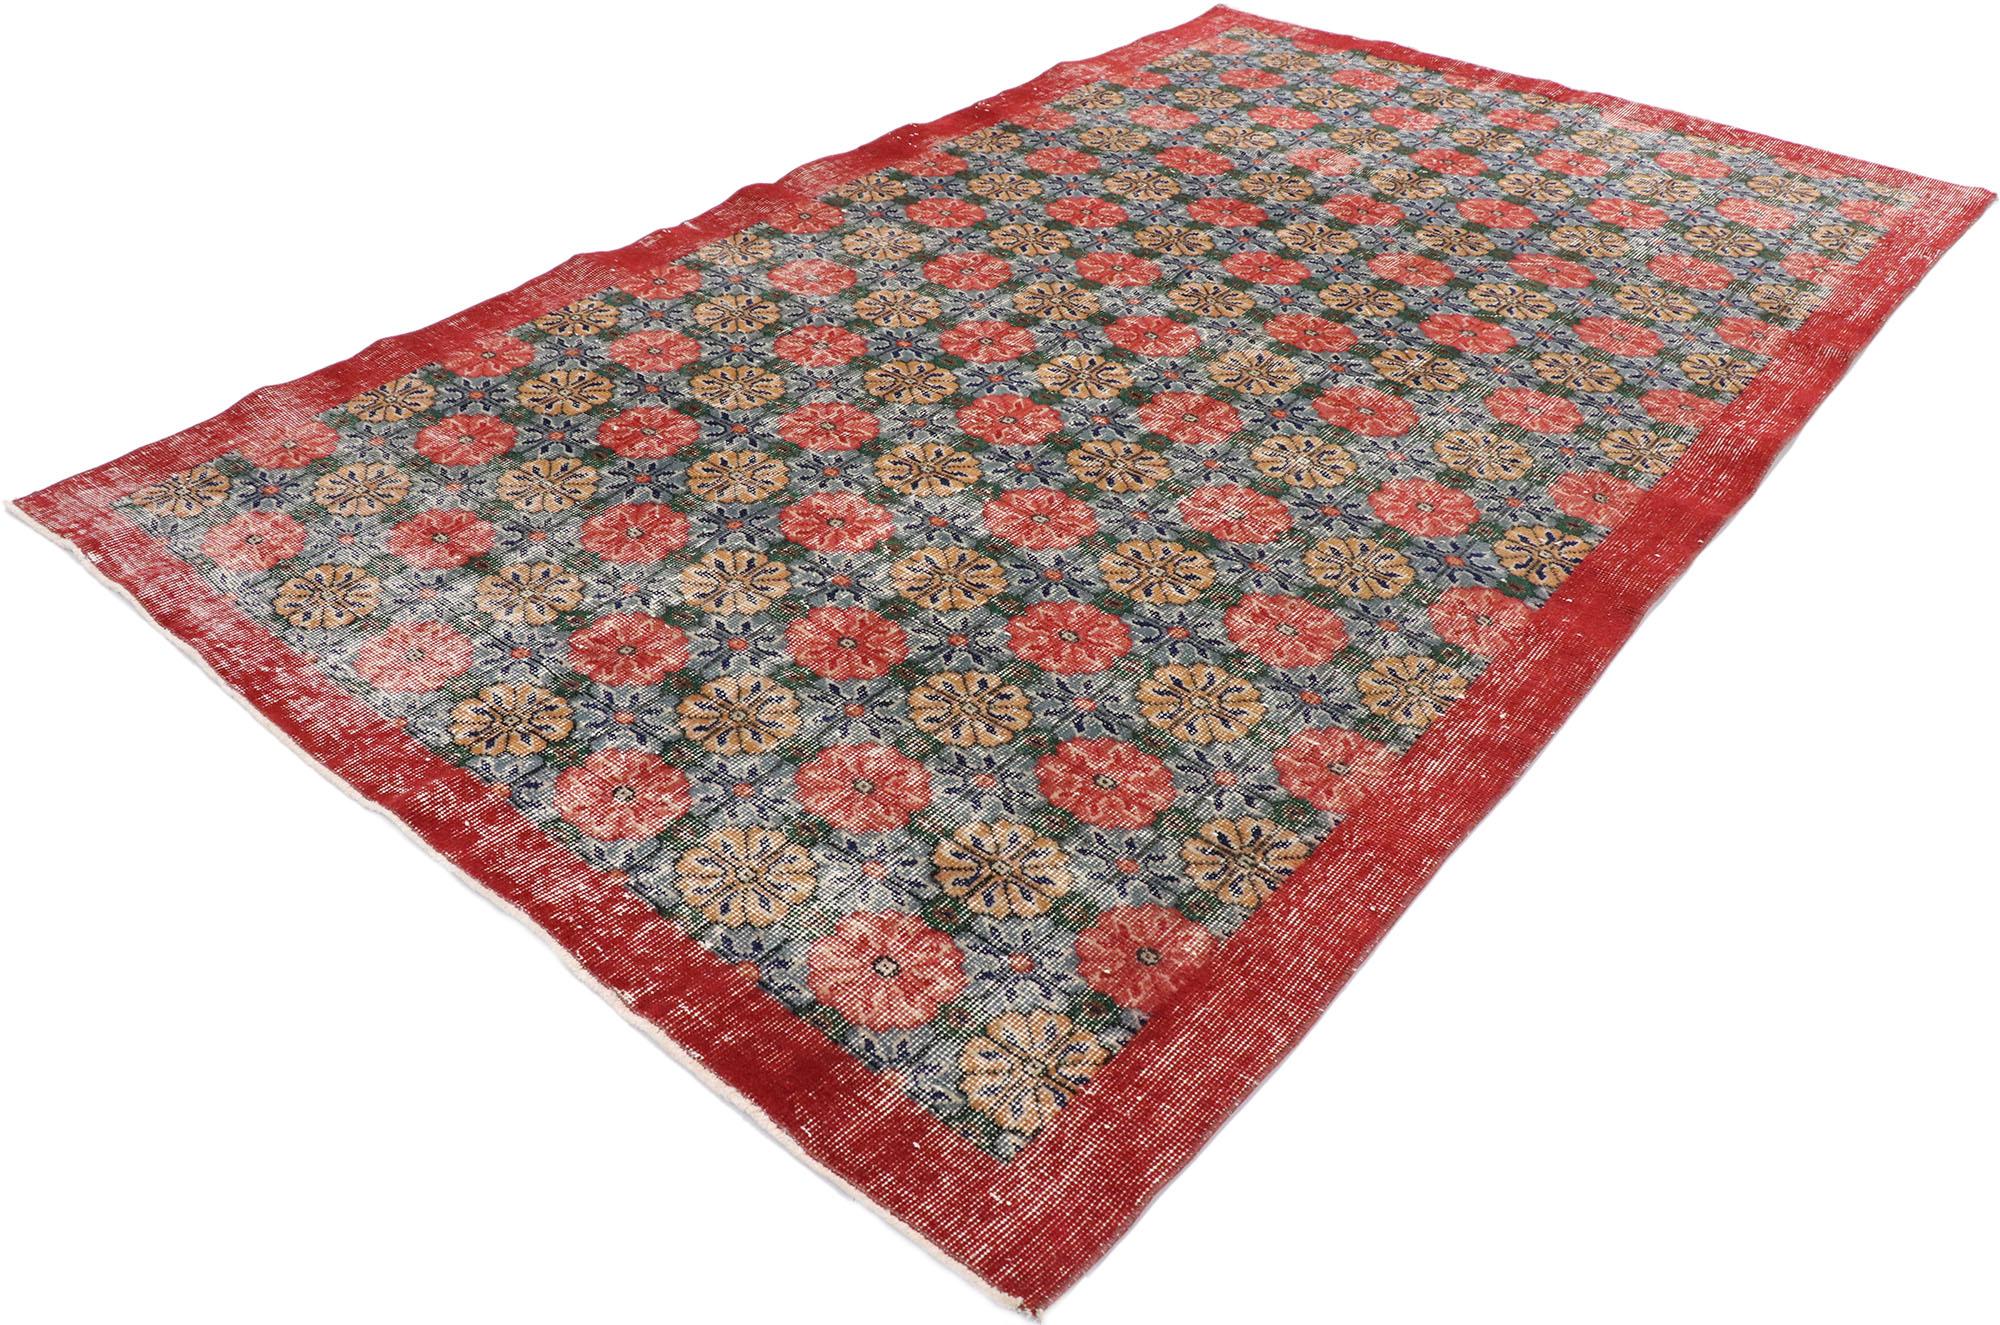 53375 distressed vintage Turkish Sivas rug with Rustic Arts & Crafts style. This hand knotted wool distressed vintage Turkish Sivas rug features a polychromatic all-over floral pattern comprised of offset rows of open blossoms. Gentle waves of